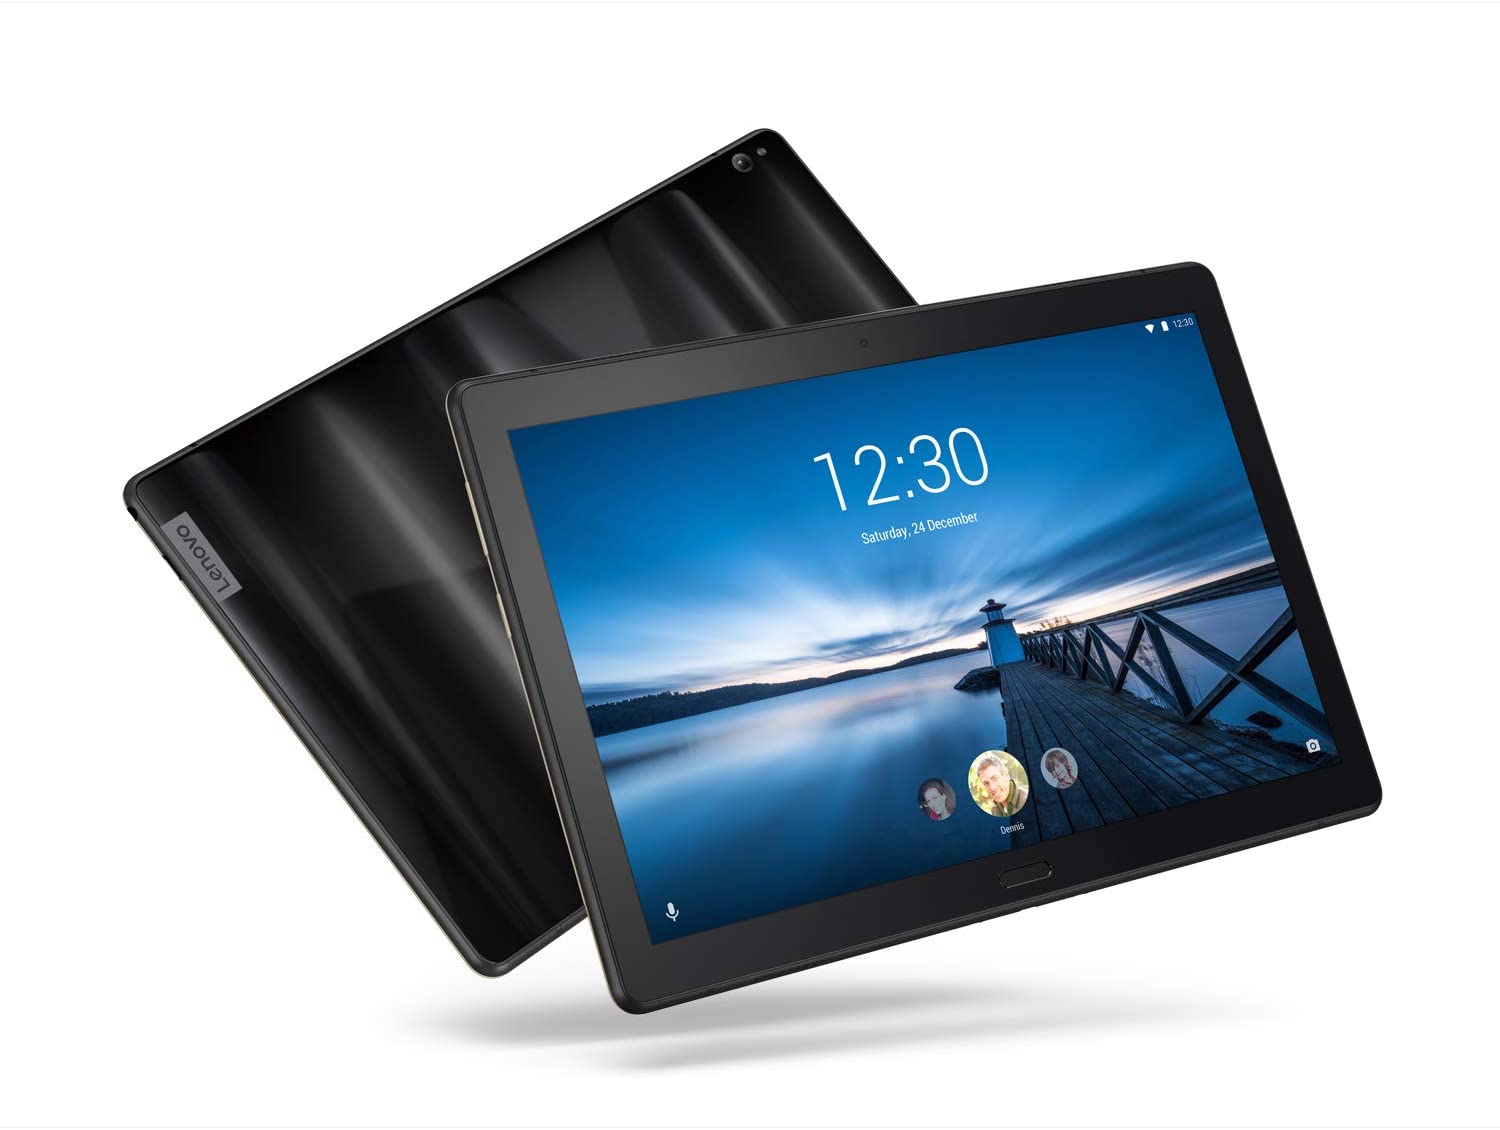 Lenovo Smart Tab P10 10.1” Android Tablet, Alexa-Enabled Smart Device